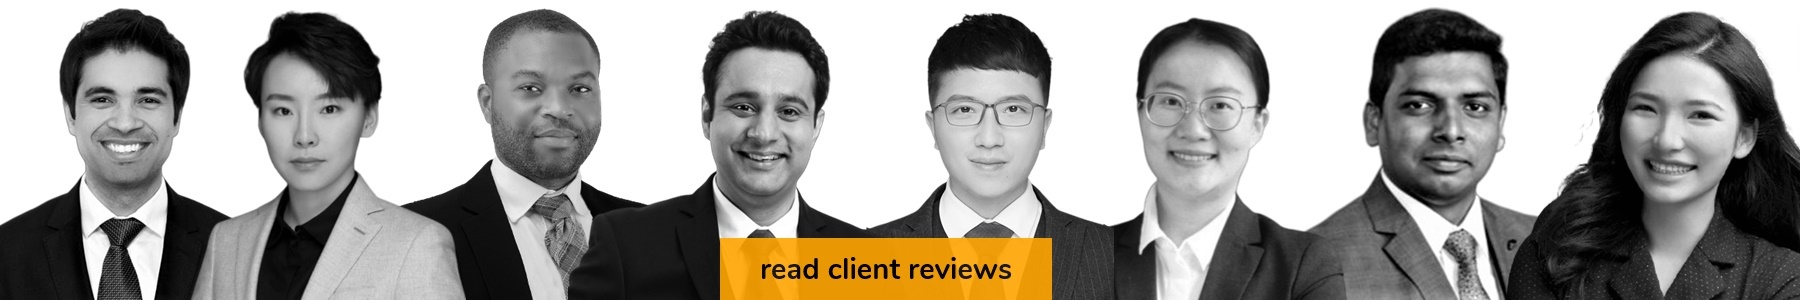 Vibranture Reviews, Best MBA Admissions Consulting